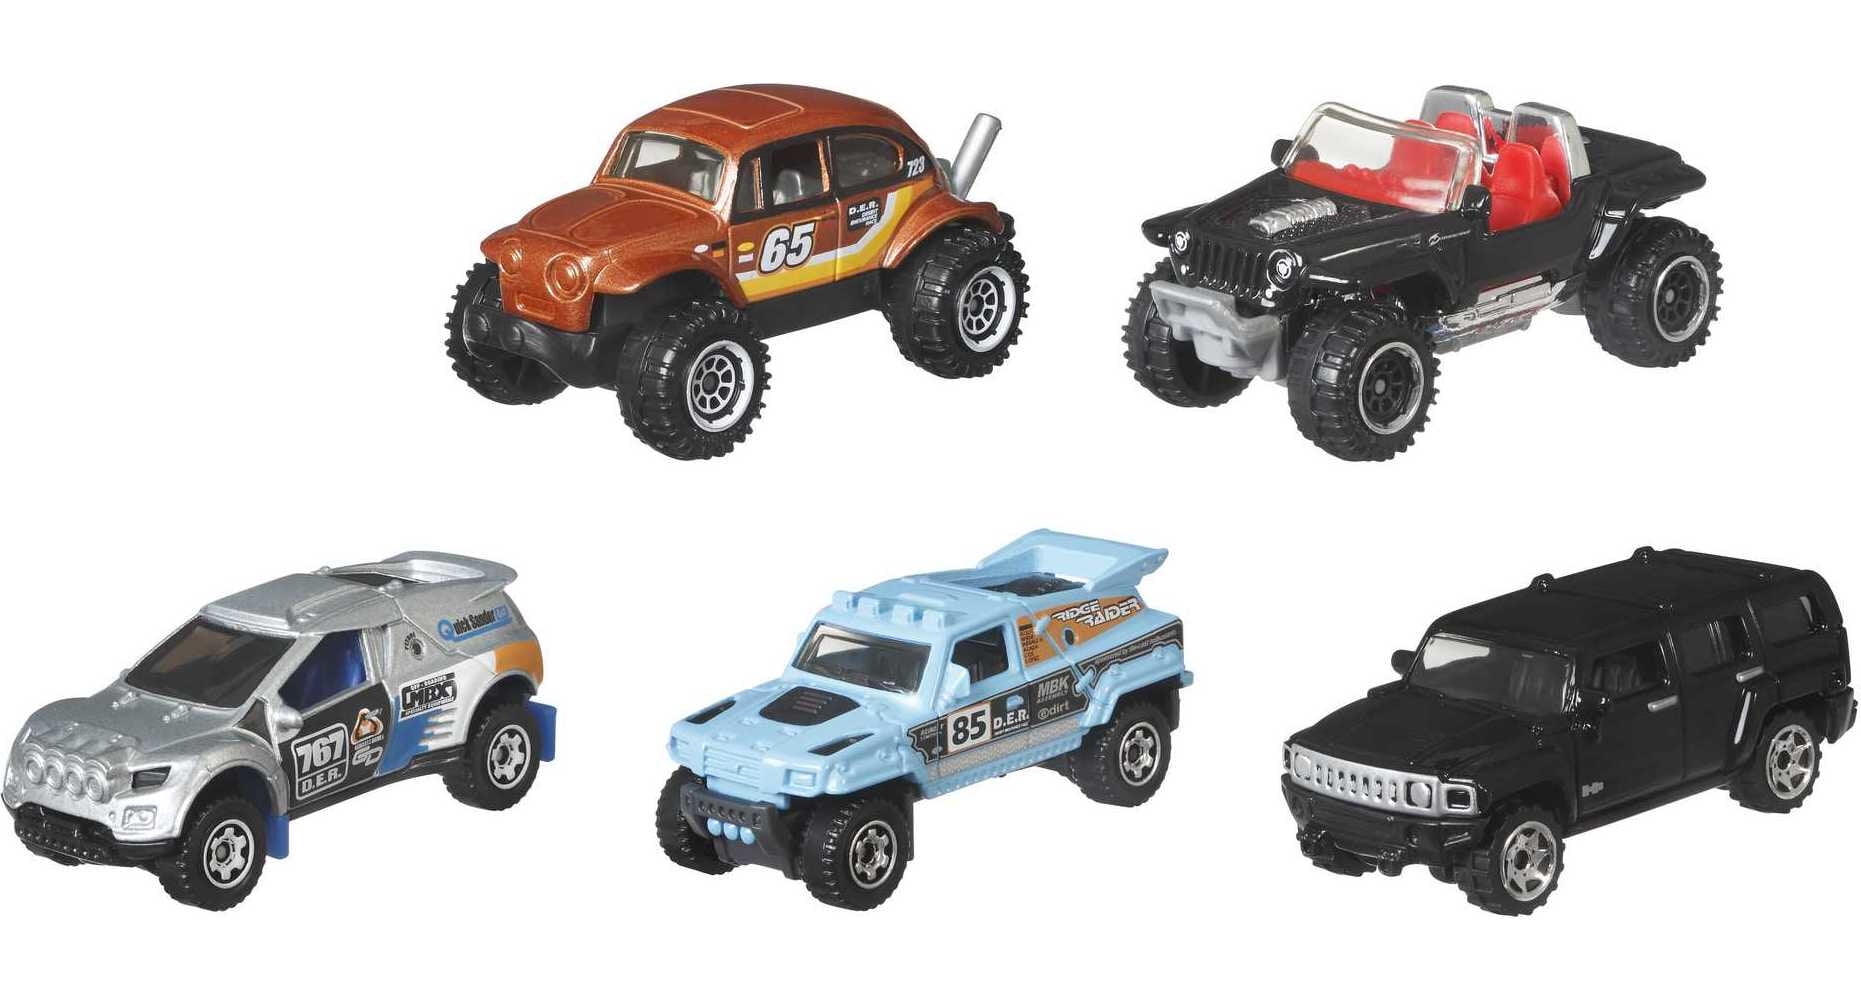 Matchbox Set of 5 Toy Cars, Trucks or Aircraft in 1:64 Scale (Styles May Vary)